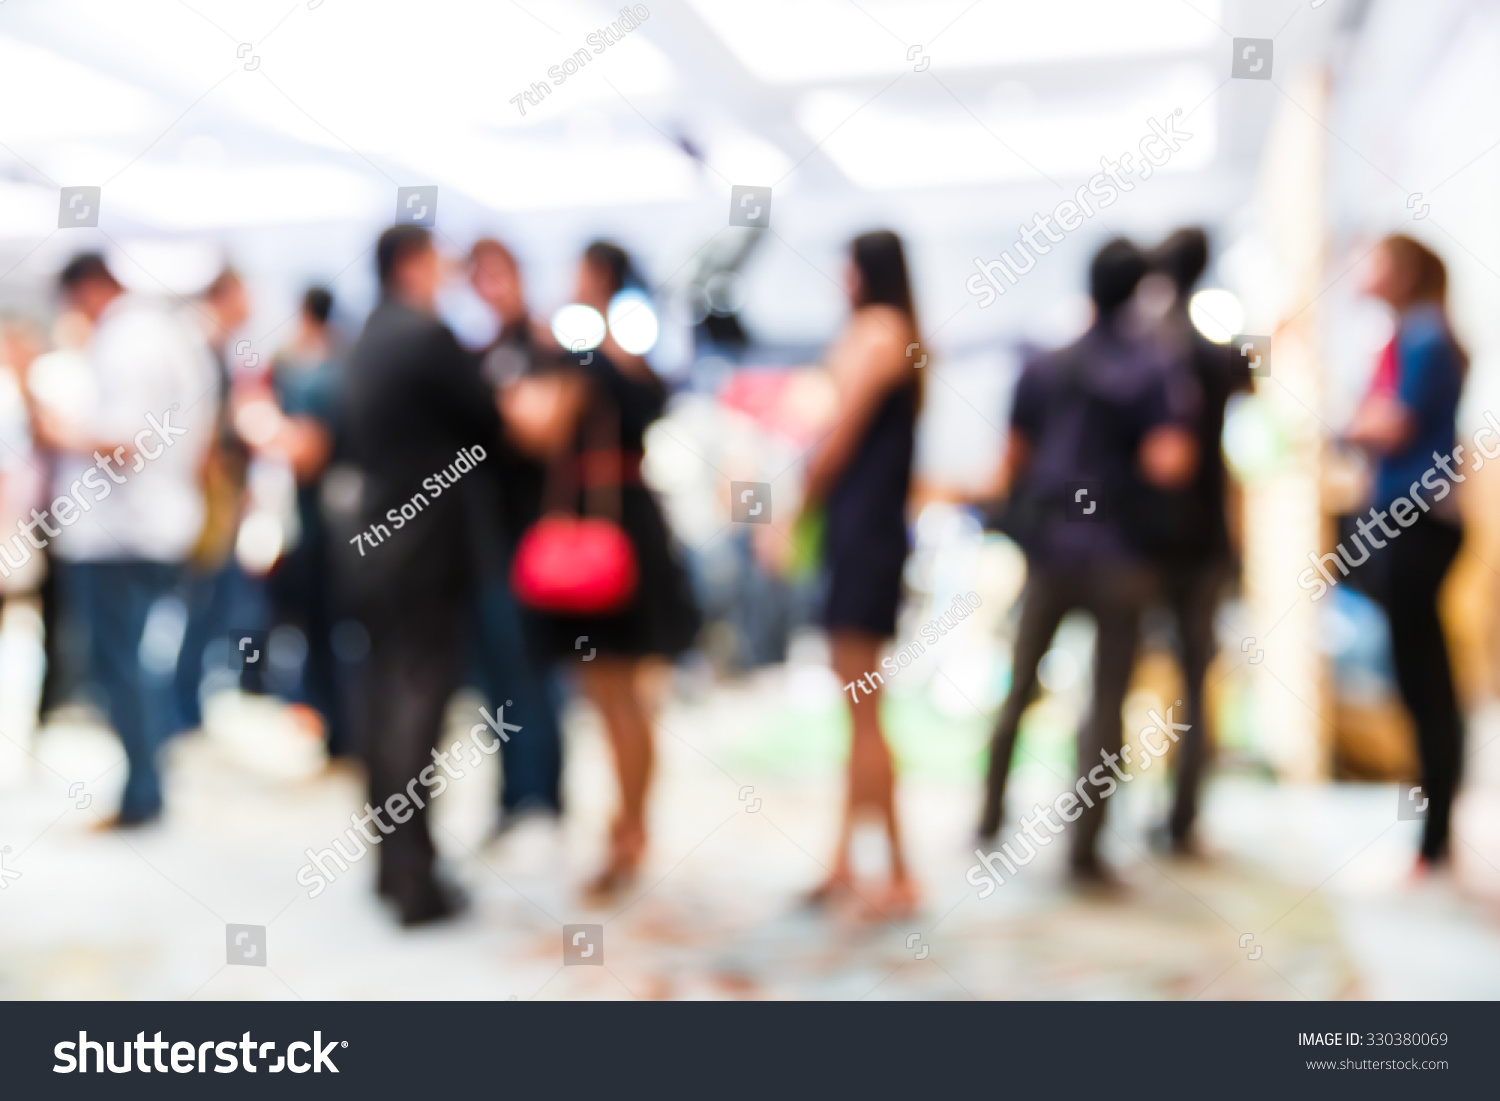 Abstract blurred people in press conference room, business concept, official new product launches #330380069